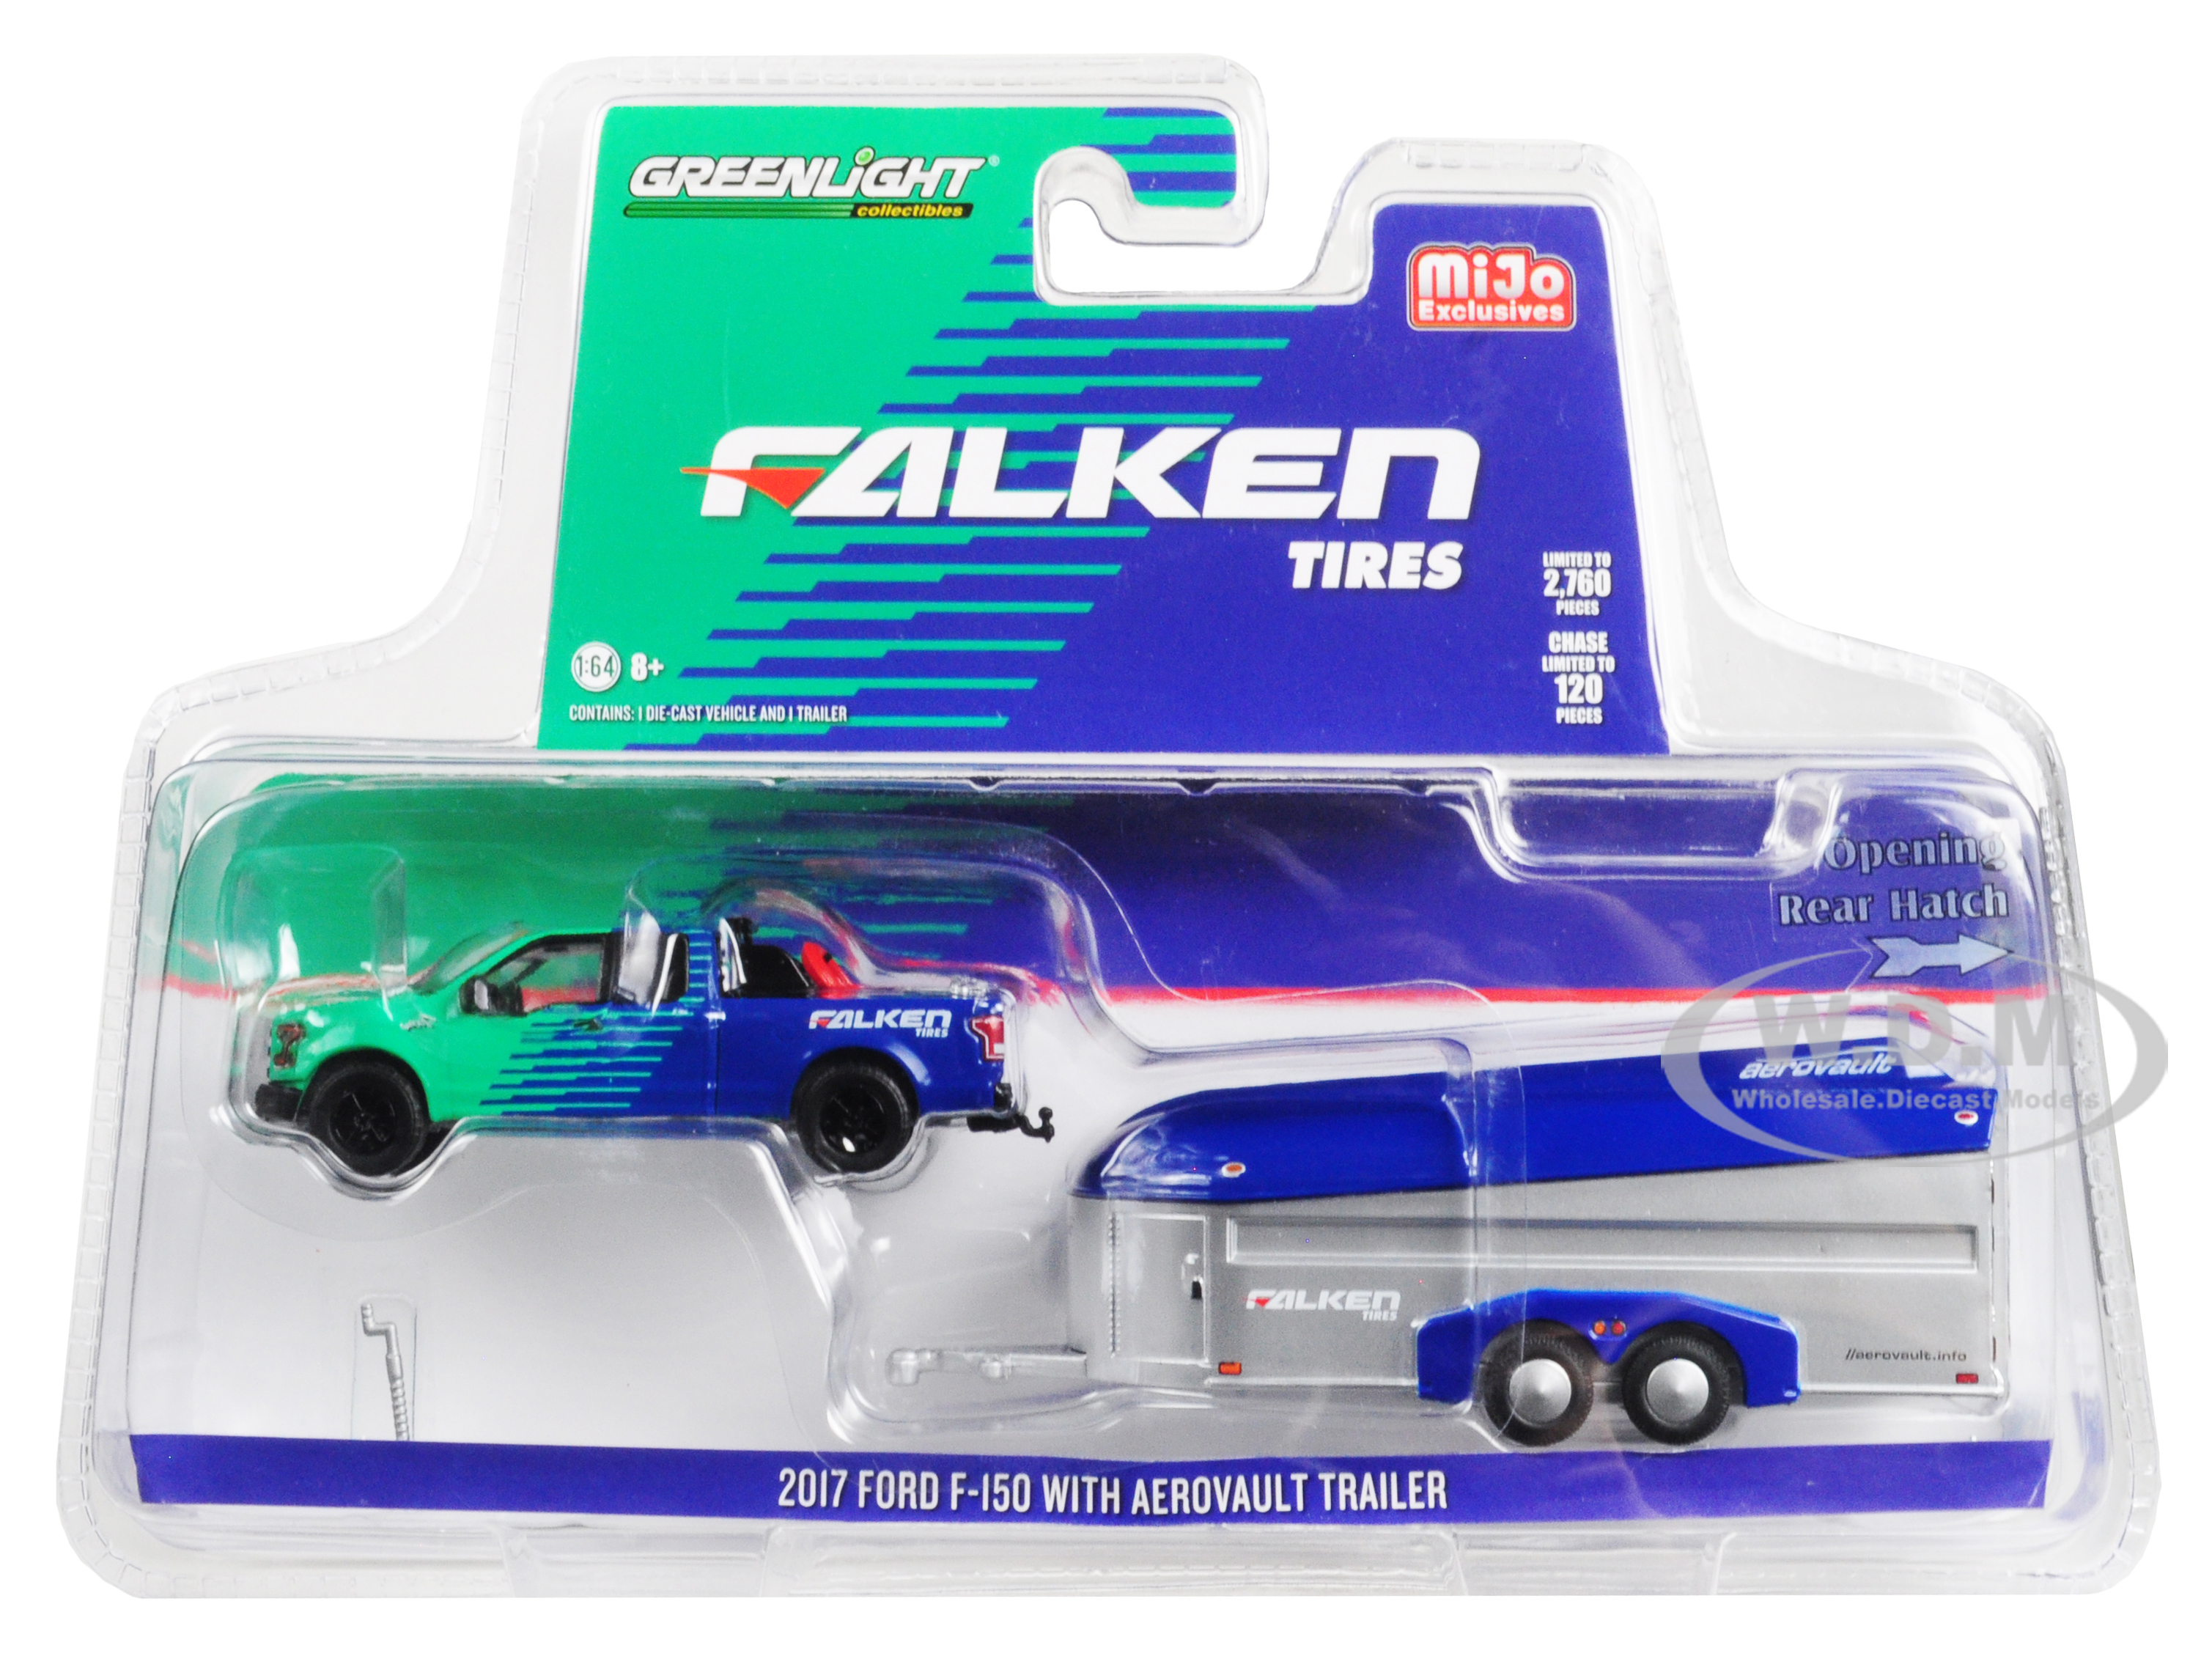 2017 Ford F-150 Pickup Truck and Aerovault Trailer "Falken Tires" Limited Edition to 2760 pieces Worldwide 1/64 Diecast Model Car by Greenlight